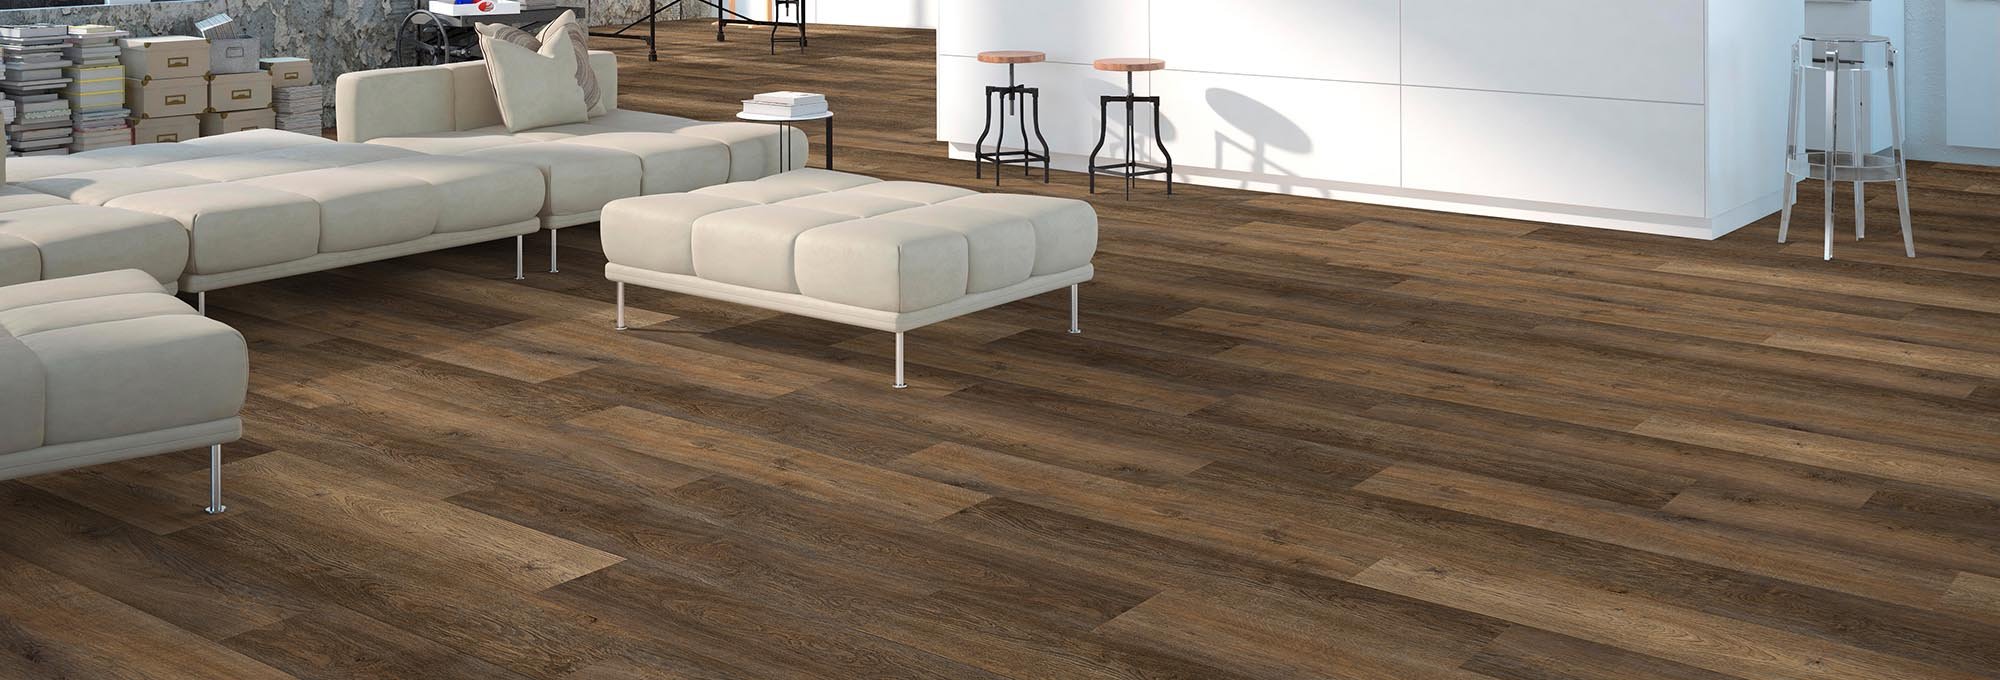 Shop Flooring Products from Gary Denney Floor Covering & Carpet Warehouse in The Dalles, OR